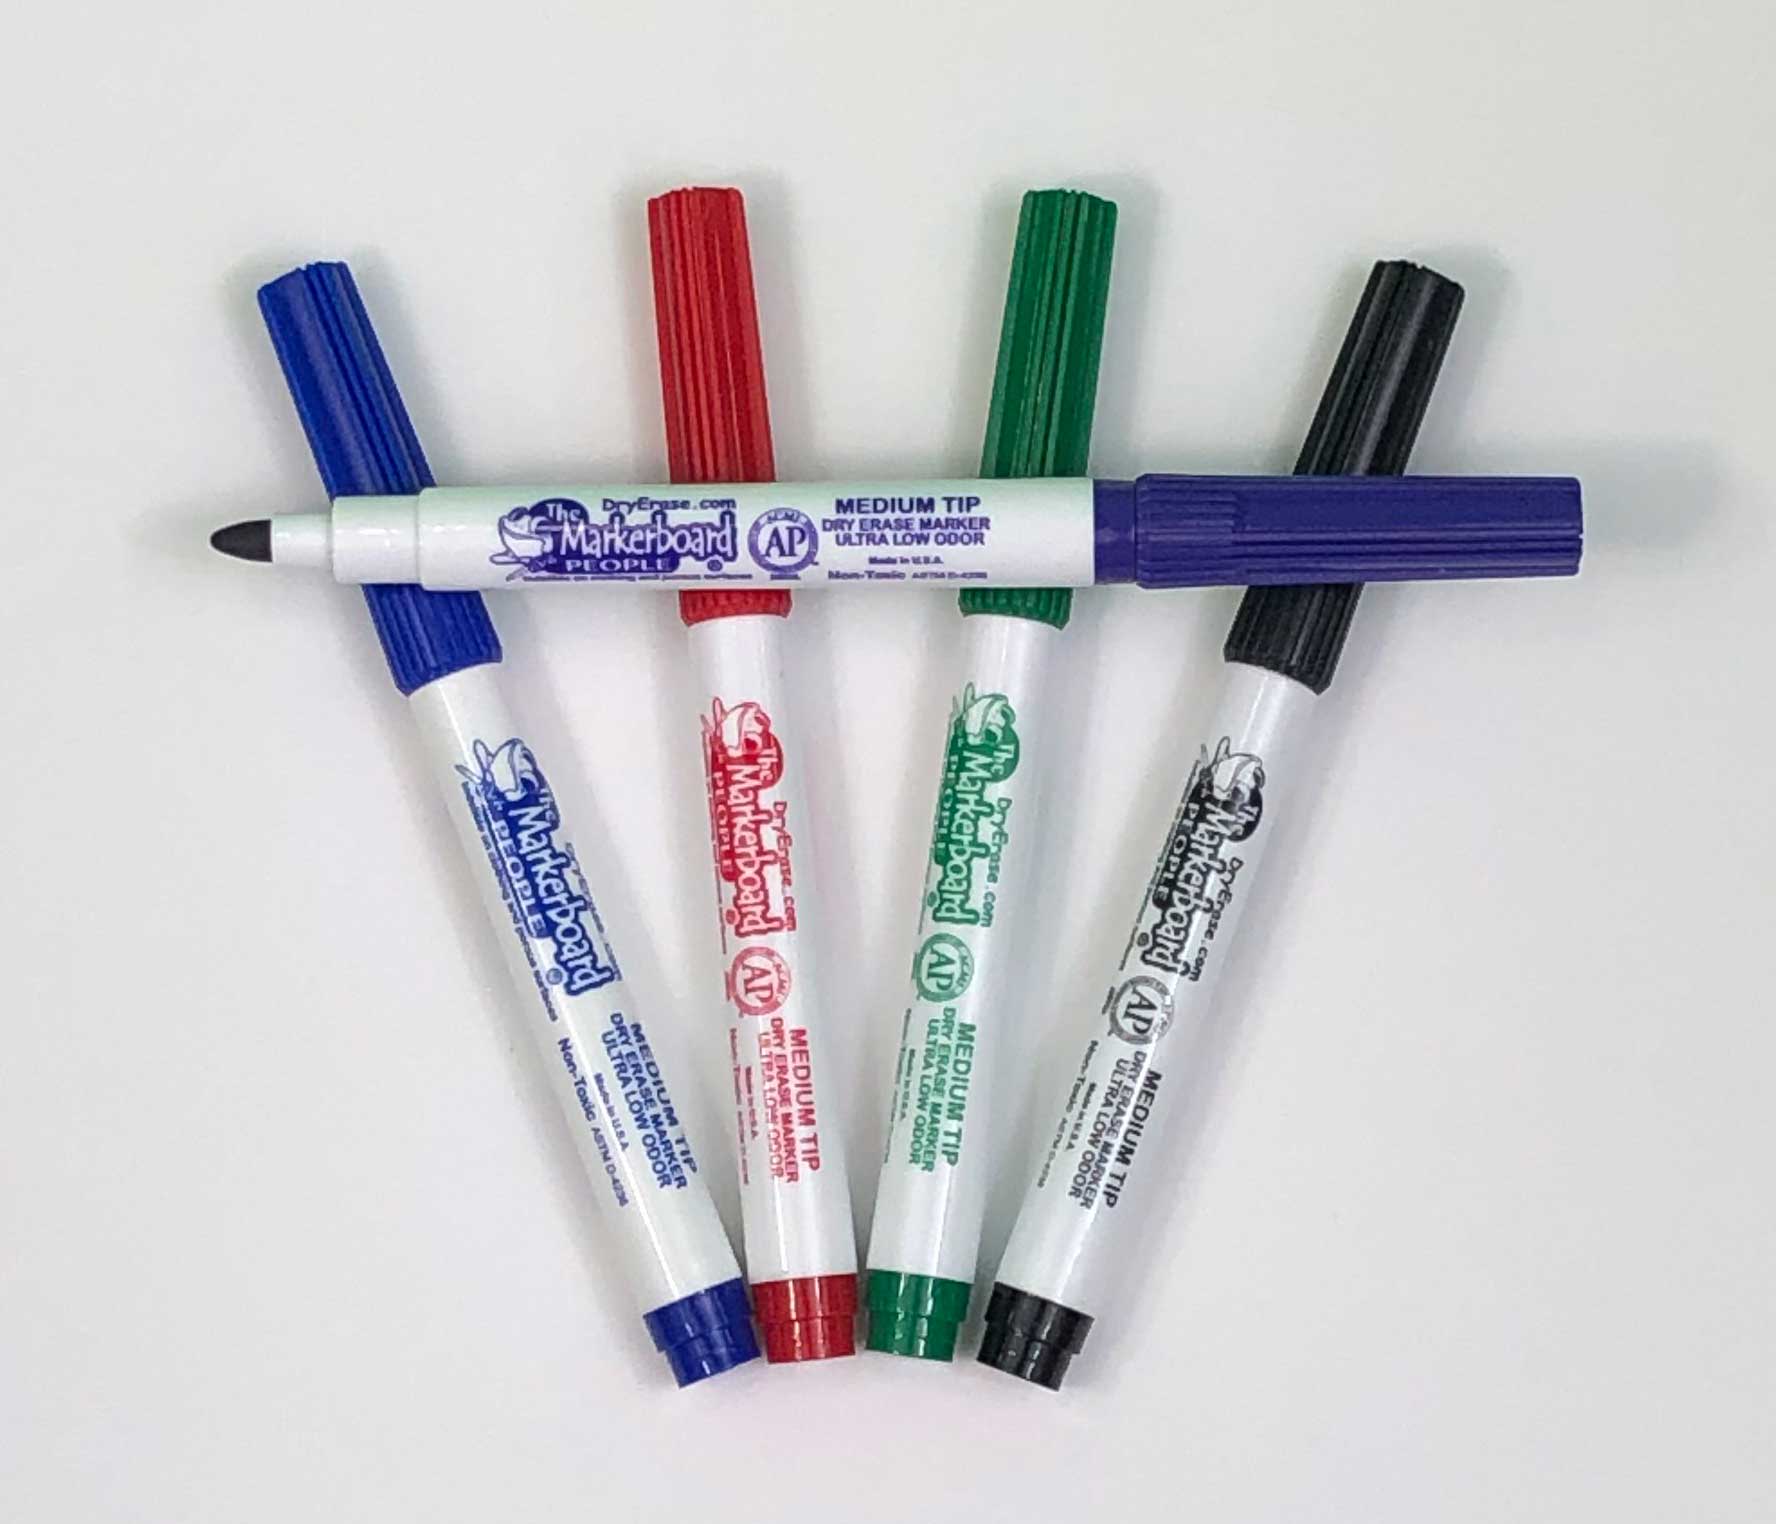 Student Deluxe Tip Dry Erase Markers - MTM